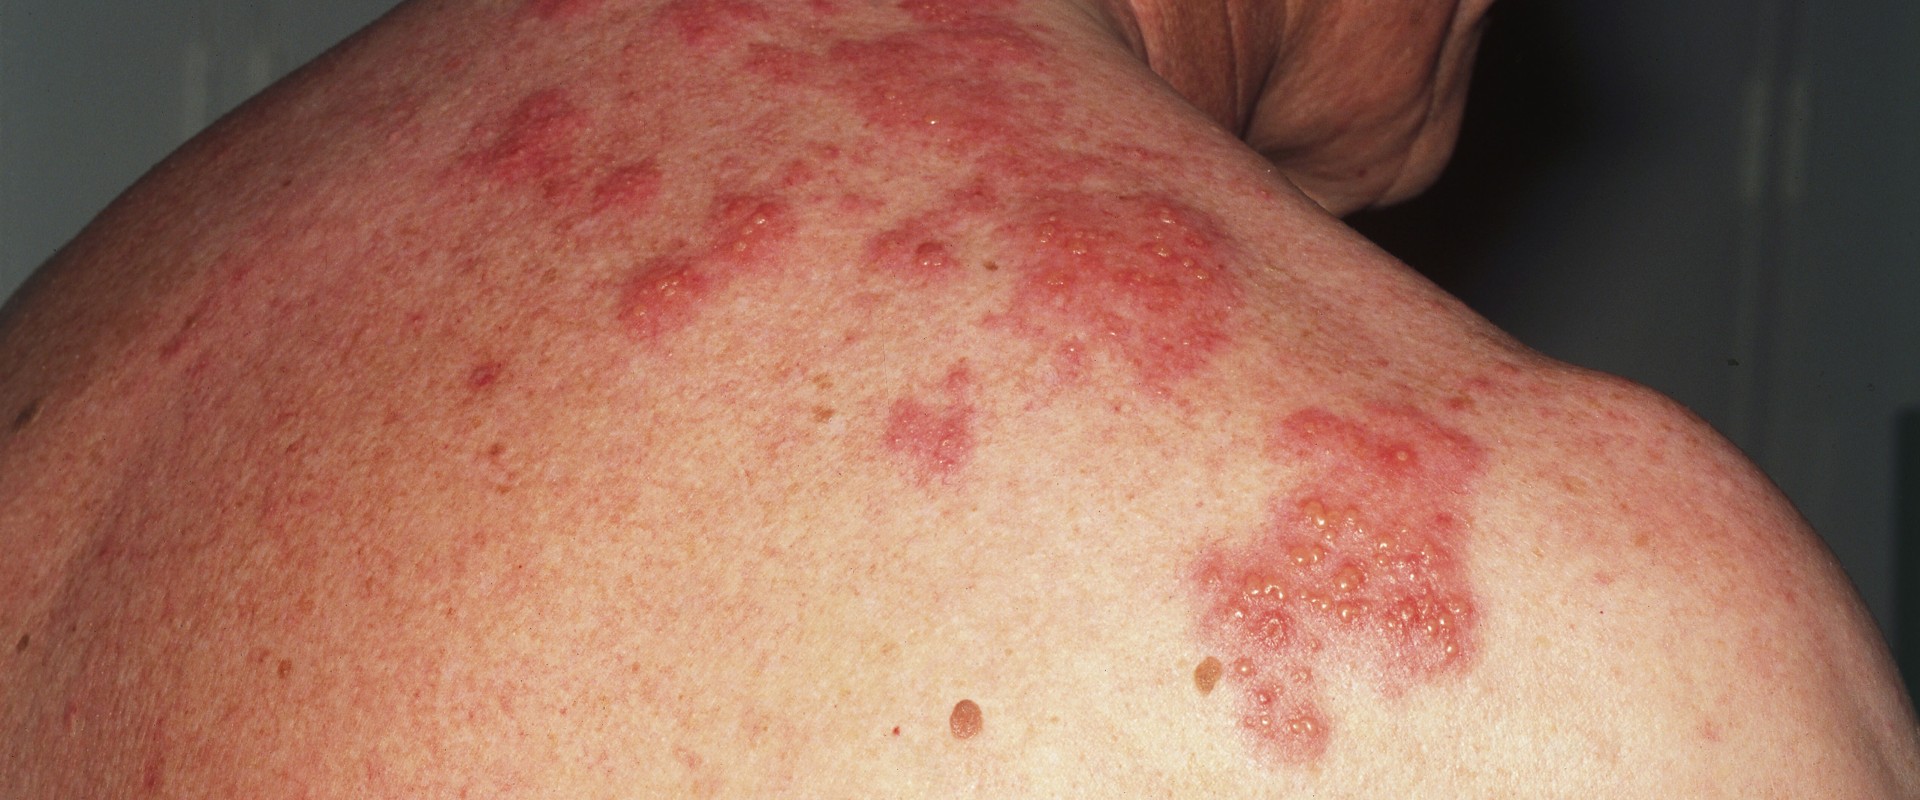 Risks Associated with the Shingles Vaccine